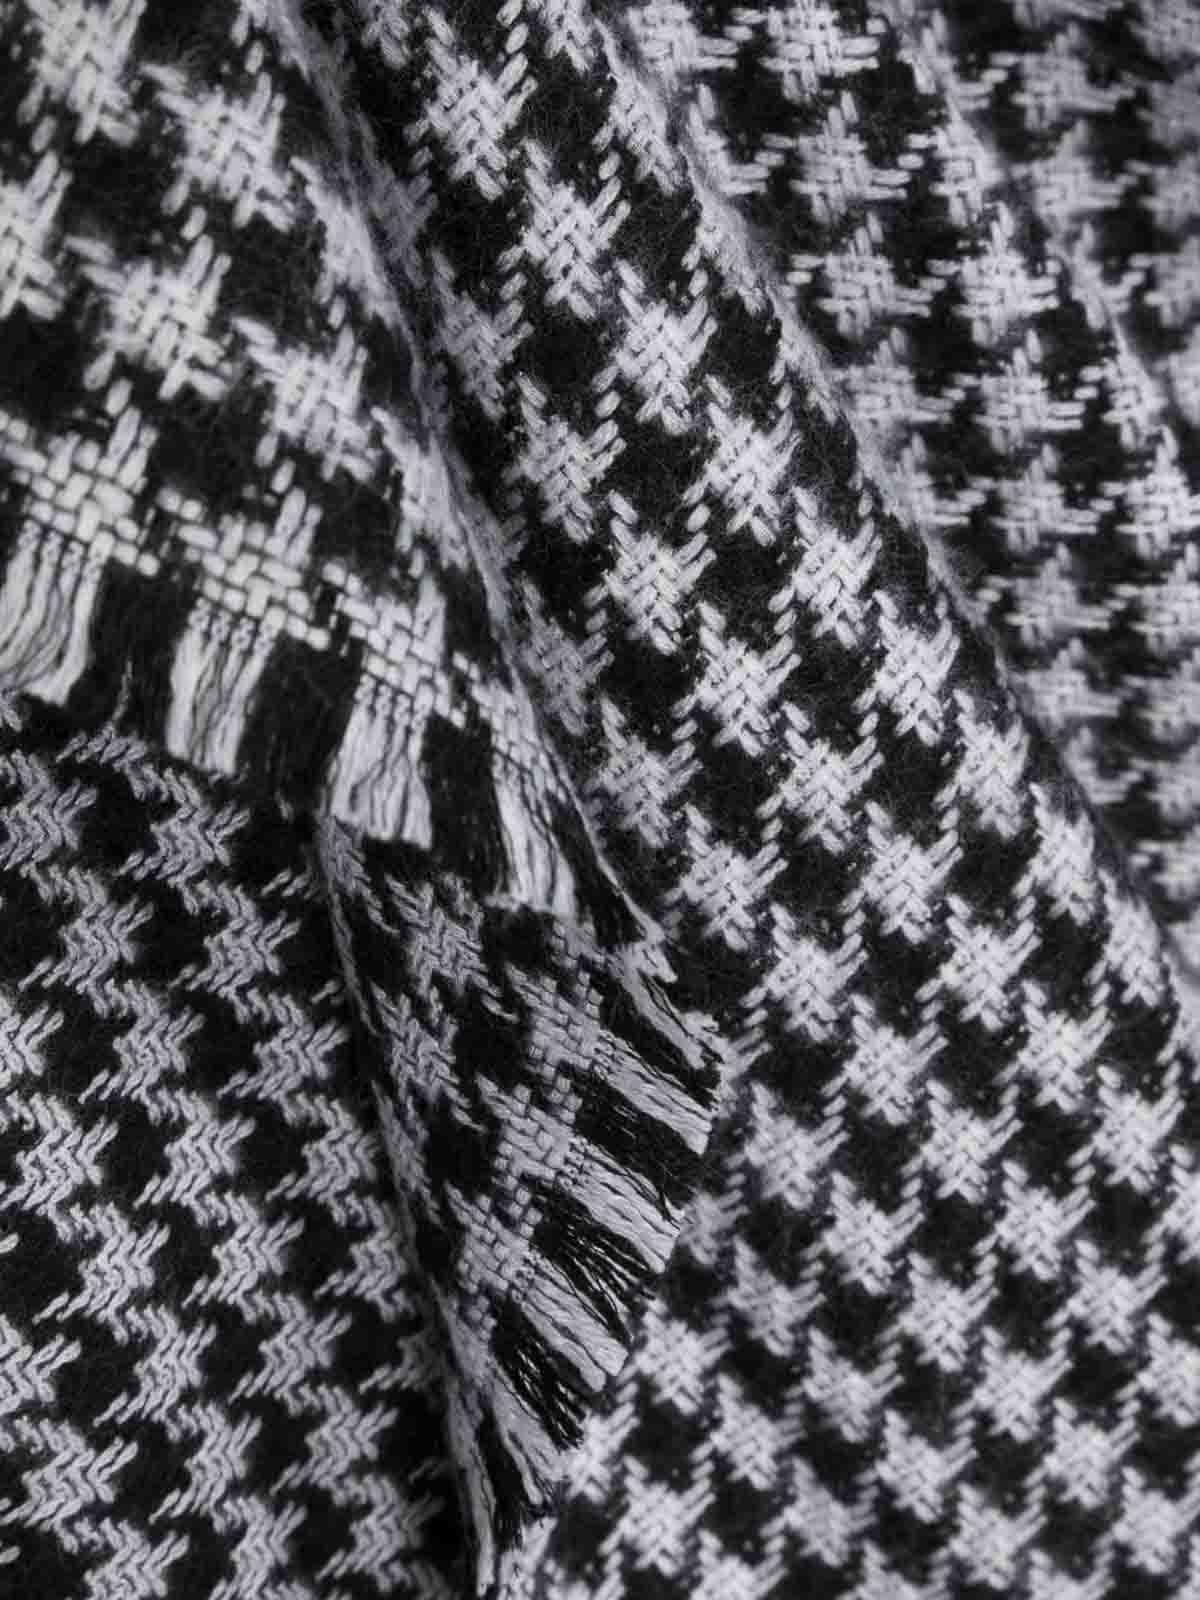 Shop Acne Studios Houndstooth Wool Scarf In Negro